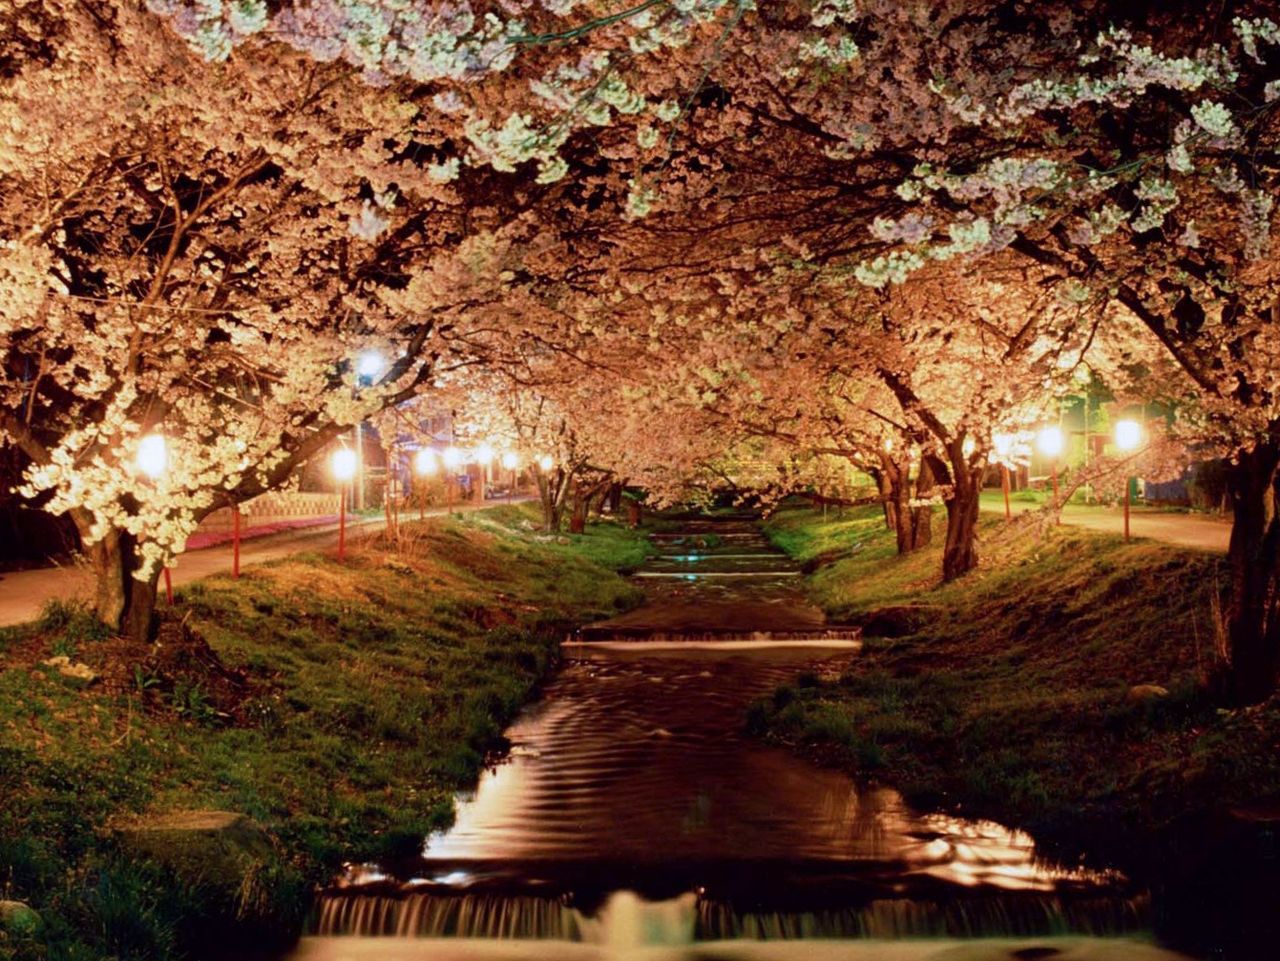 Cherry blossoms by night. (Photo courtesy of the Inawashiro Town Tourism, Commerce, and Industry Division)